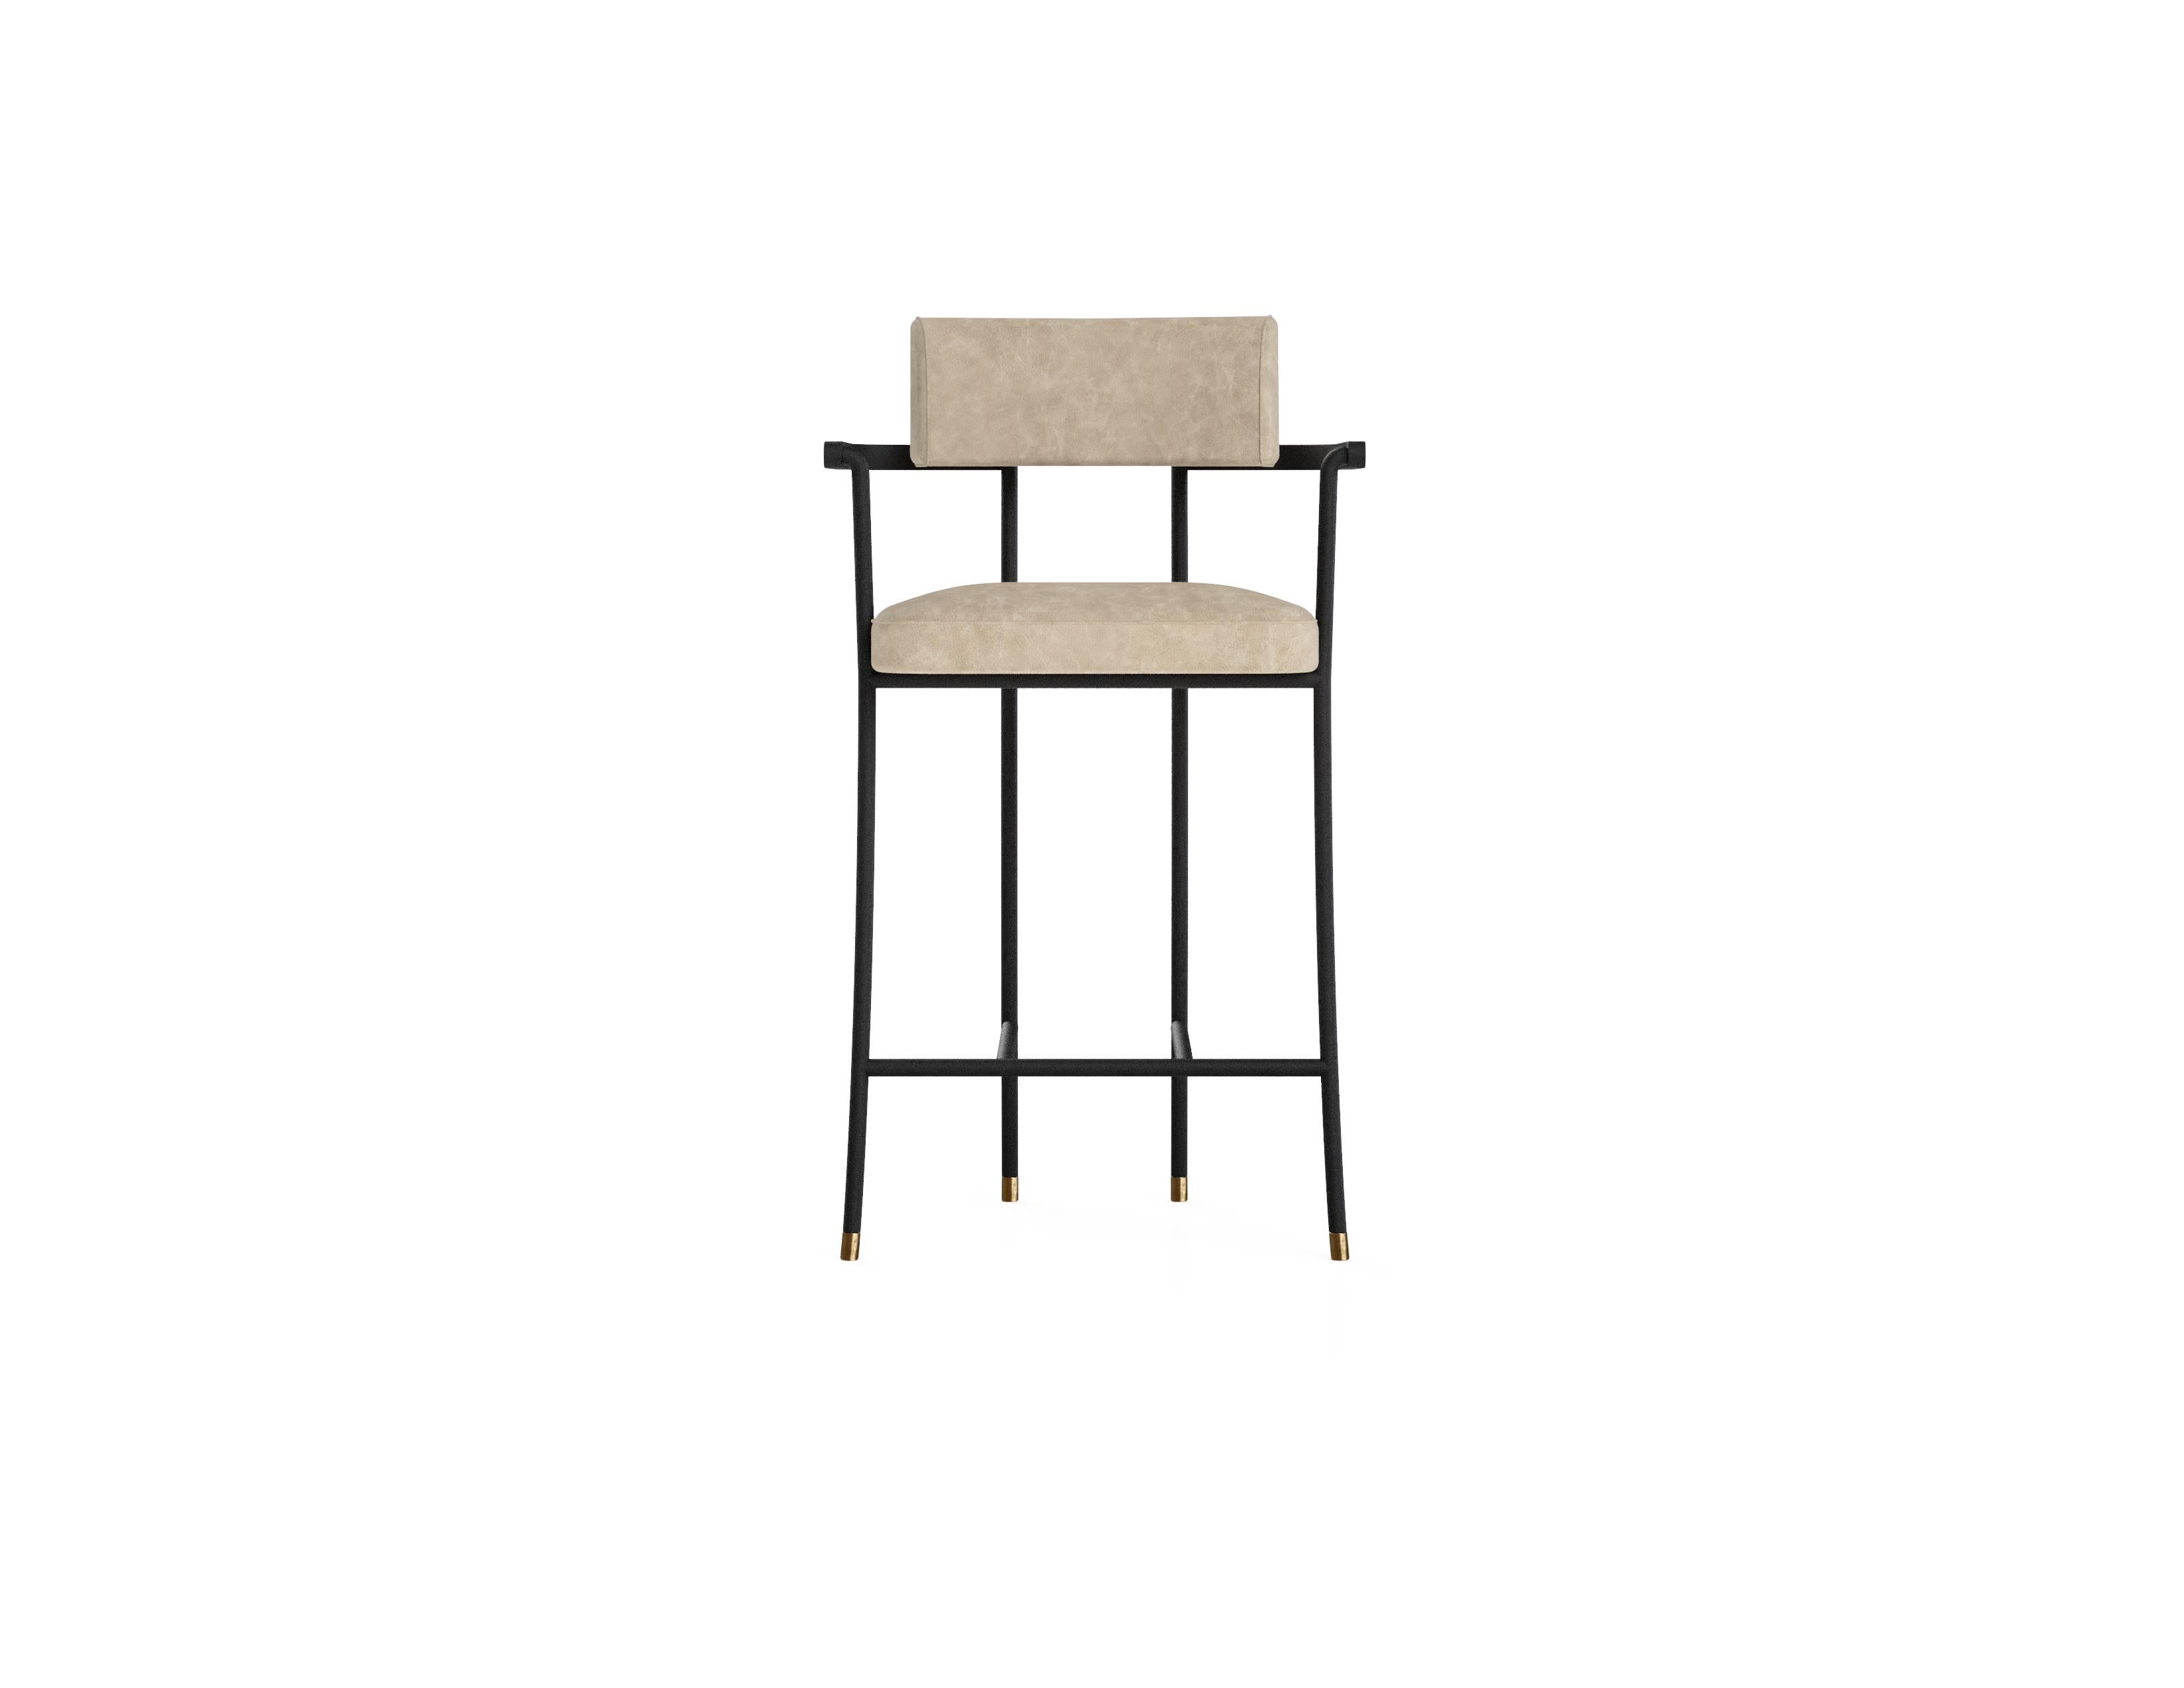 ‘The Kanat Bar Stool’ is simple yet elaborate piece that stands out with its elegant stance, fine details and comfort. Powder coated metal frame is elevated with antique  plated metal details and upholstery. The masculine metal feeling is balanced